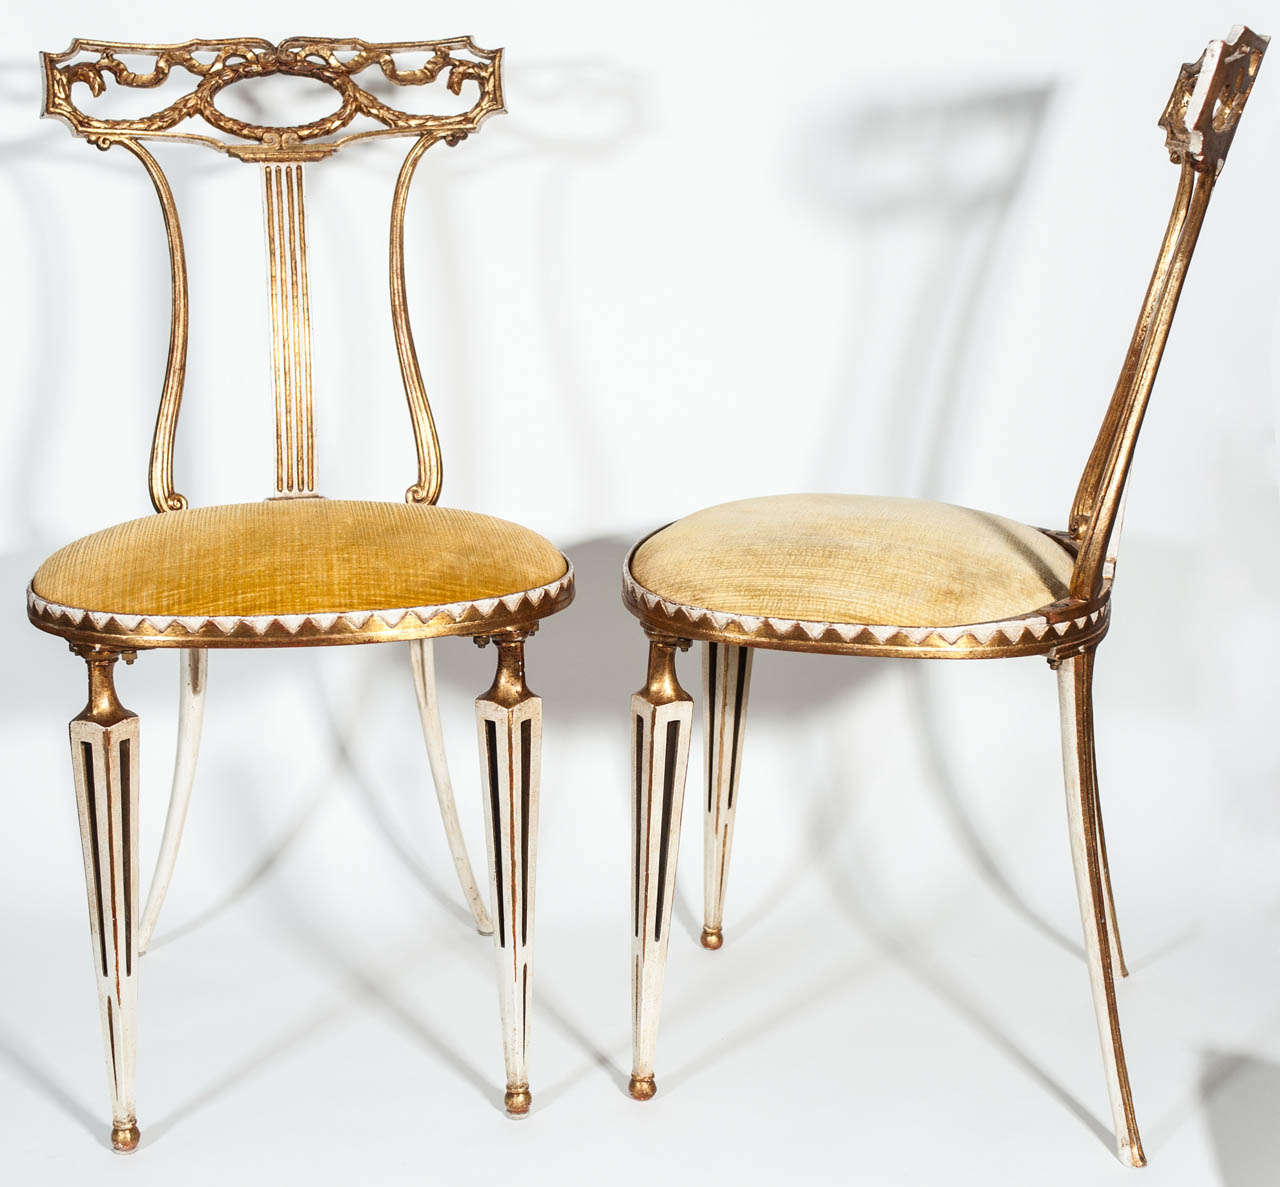 Elegant set of four chairs by Palladio. Cast iron, ivory tone frame with gilded decorative motives and upholstered seats.